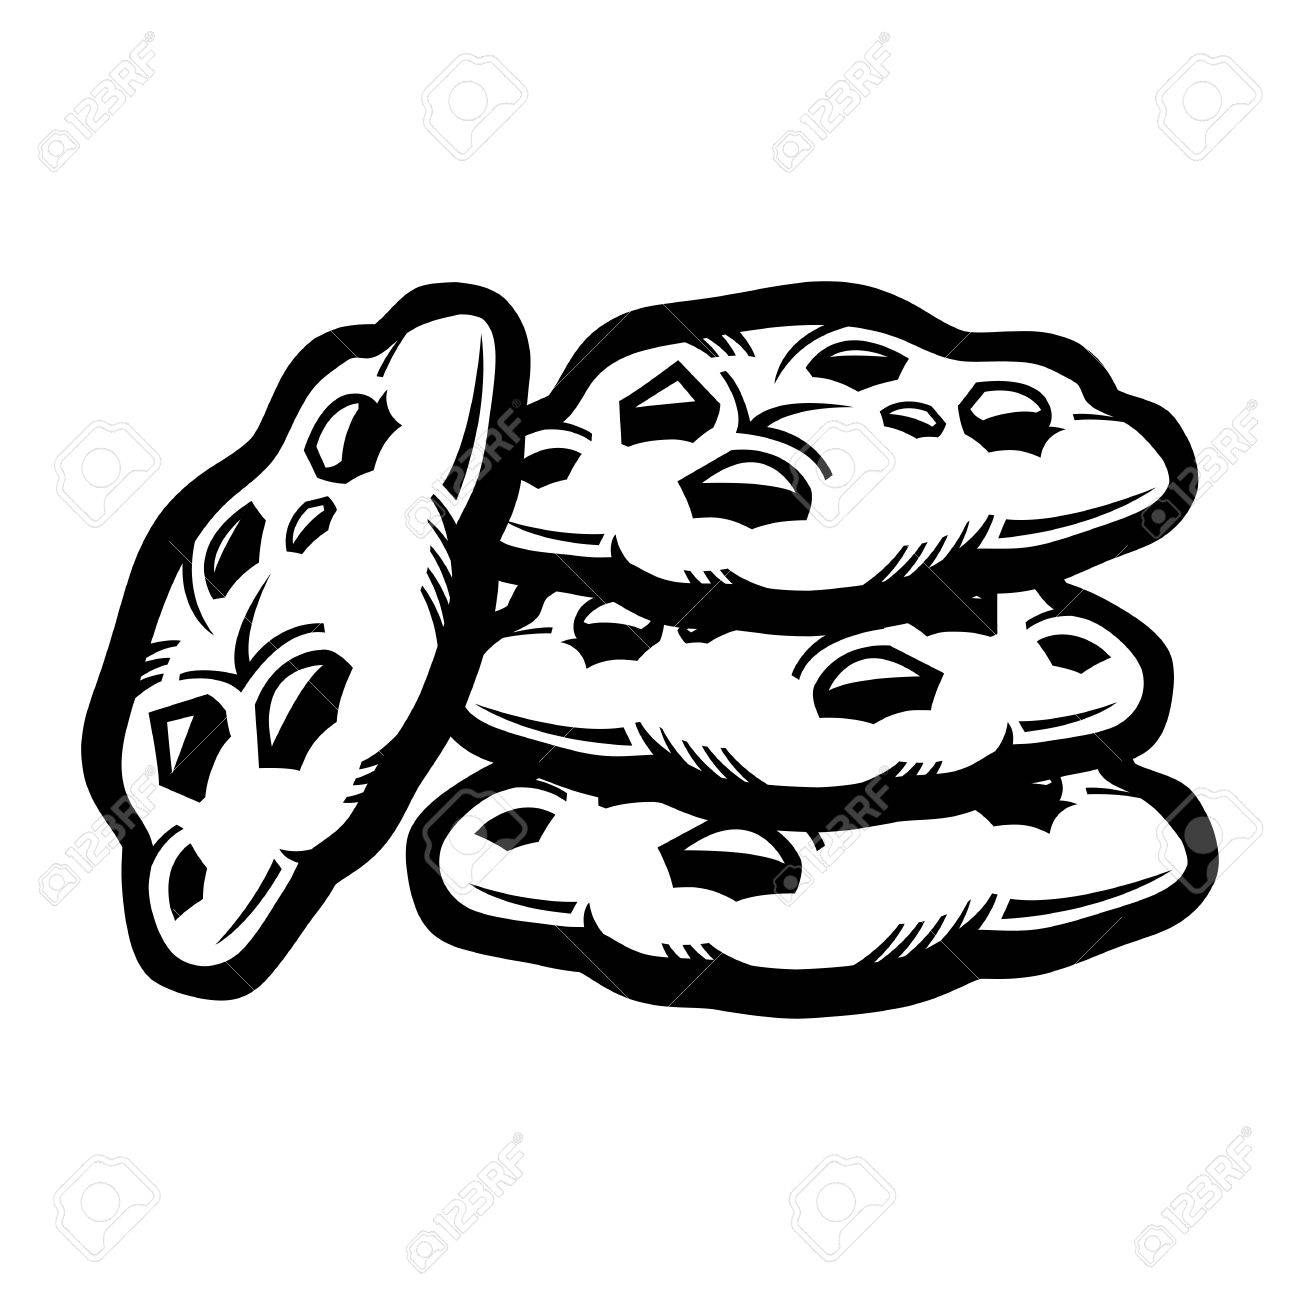 Chocolate chip cookie clipart black and white